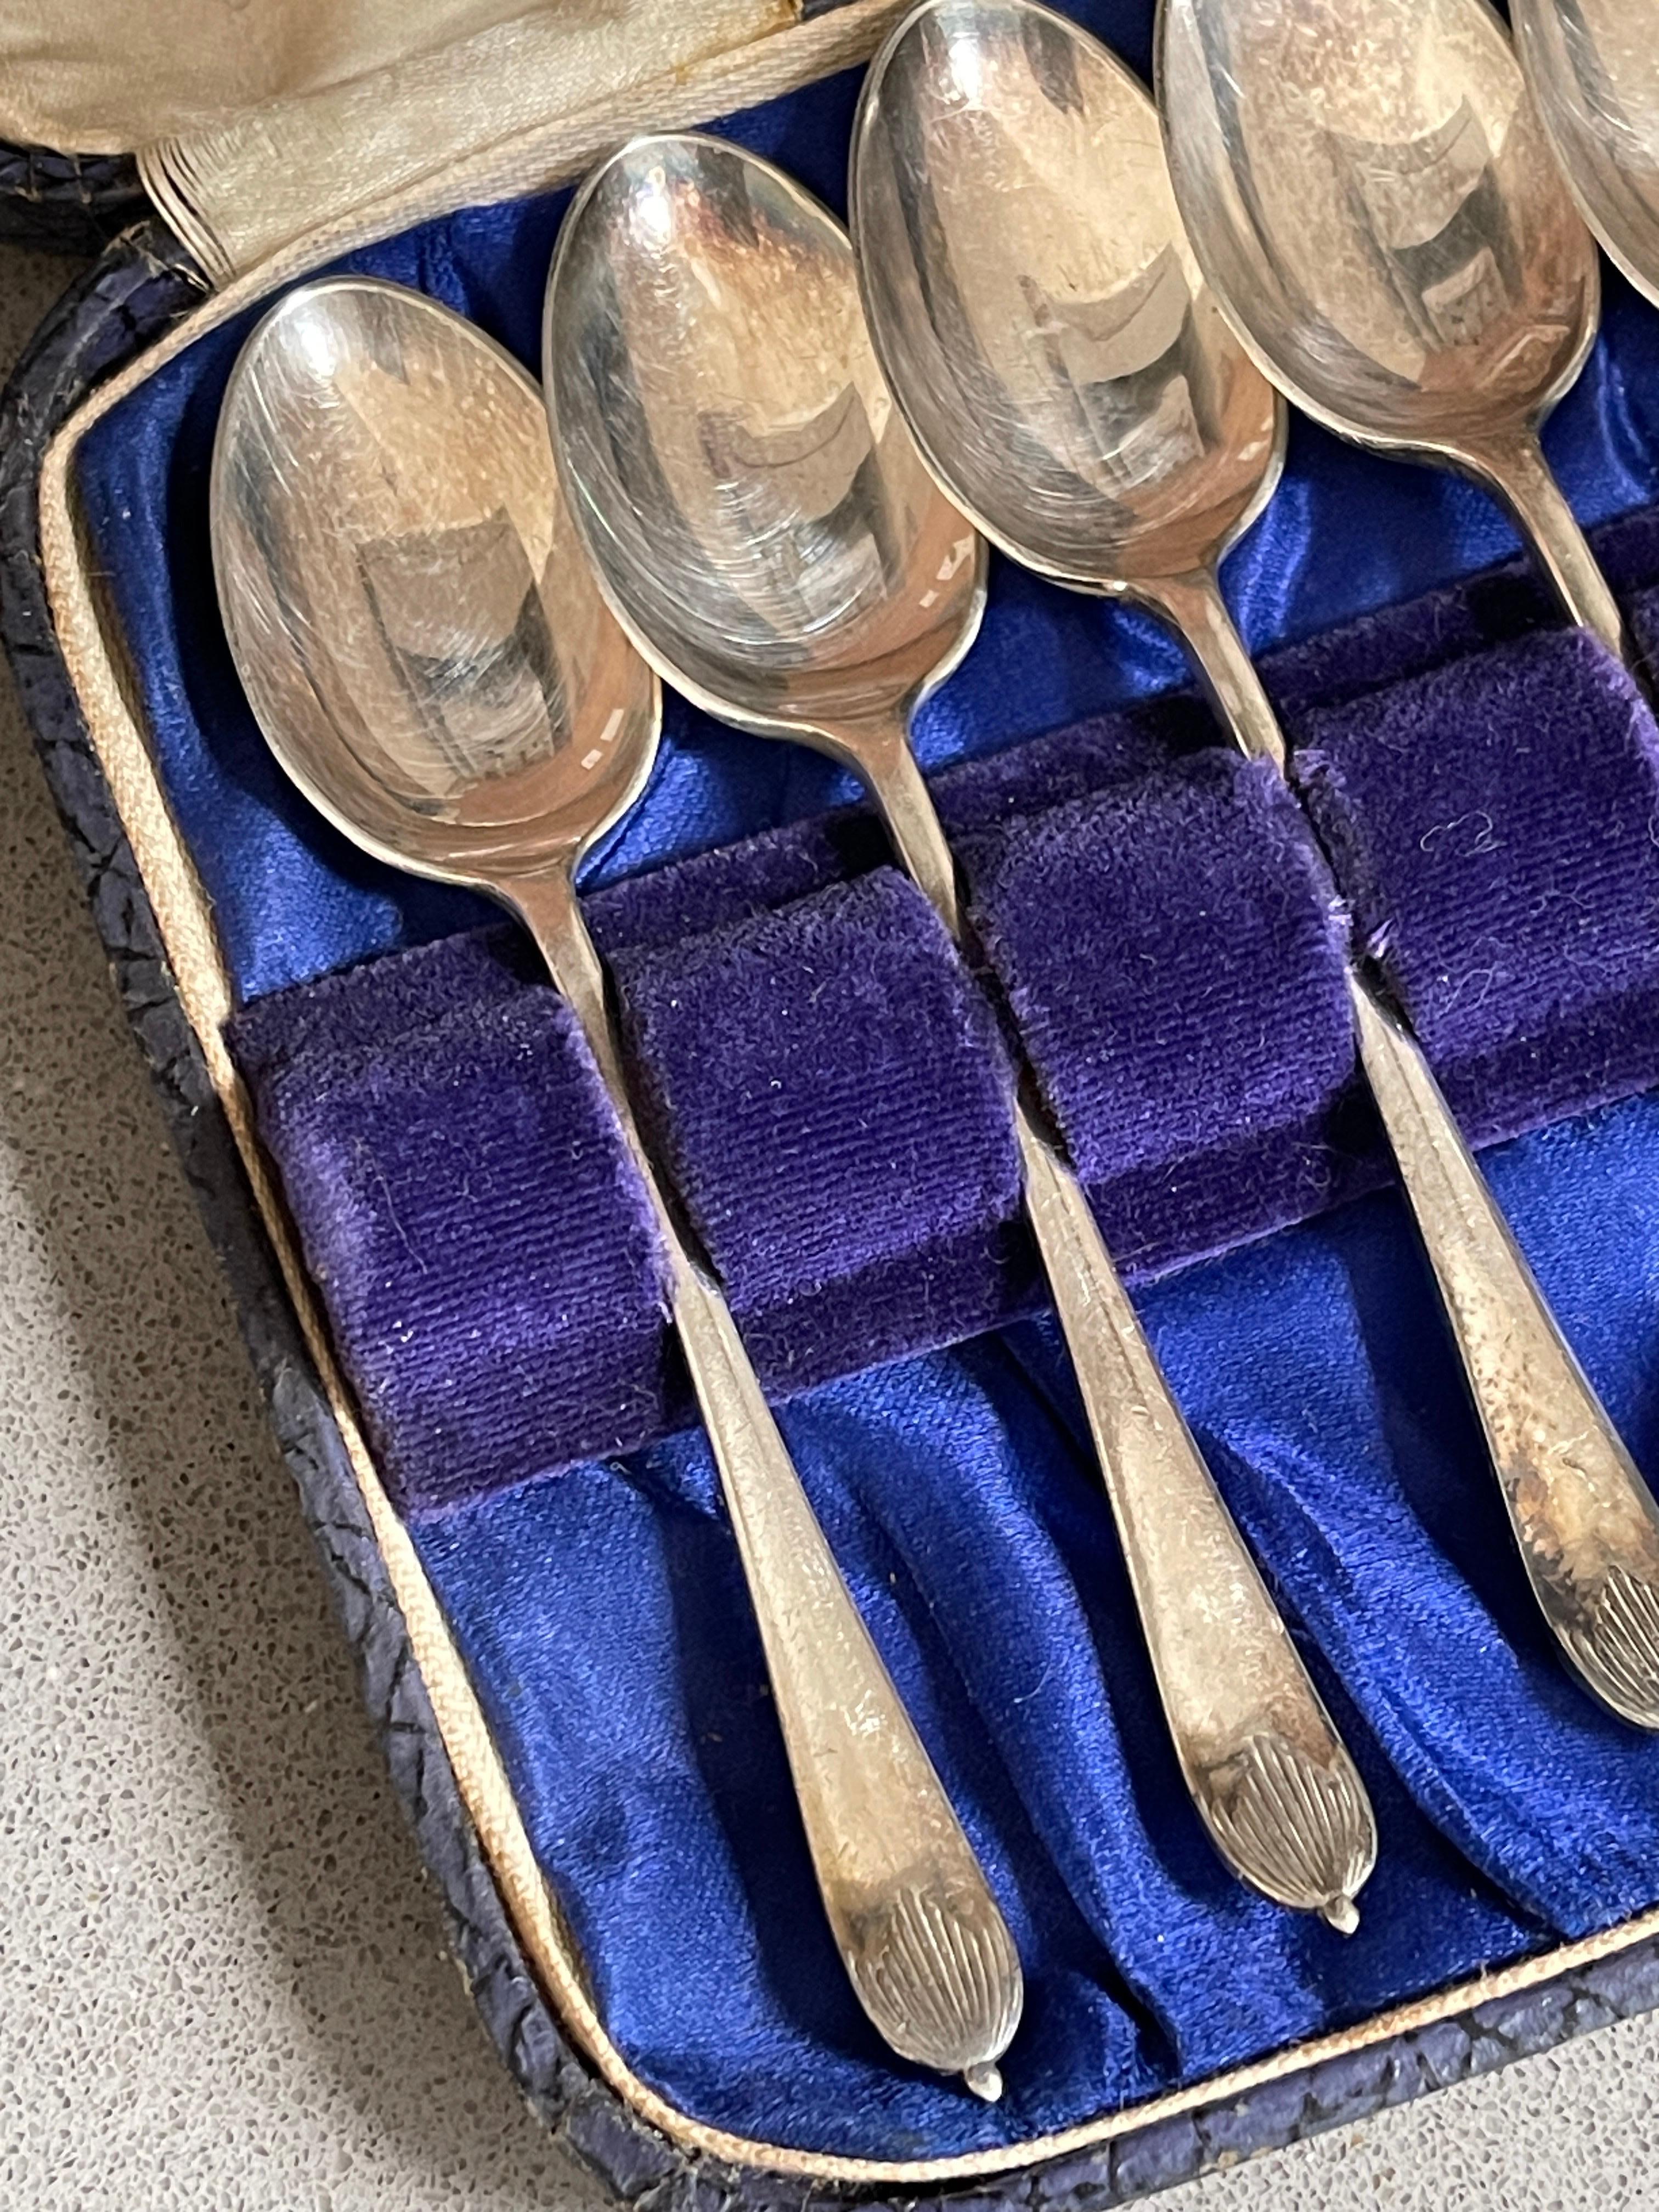 Mid-19th Century Exclusive Tea COFFEE SPOONS, 6 pcs. Sterling Silver & Box, Antique Silver Spoons For Sale